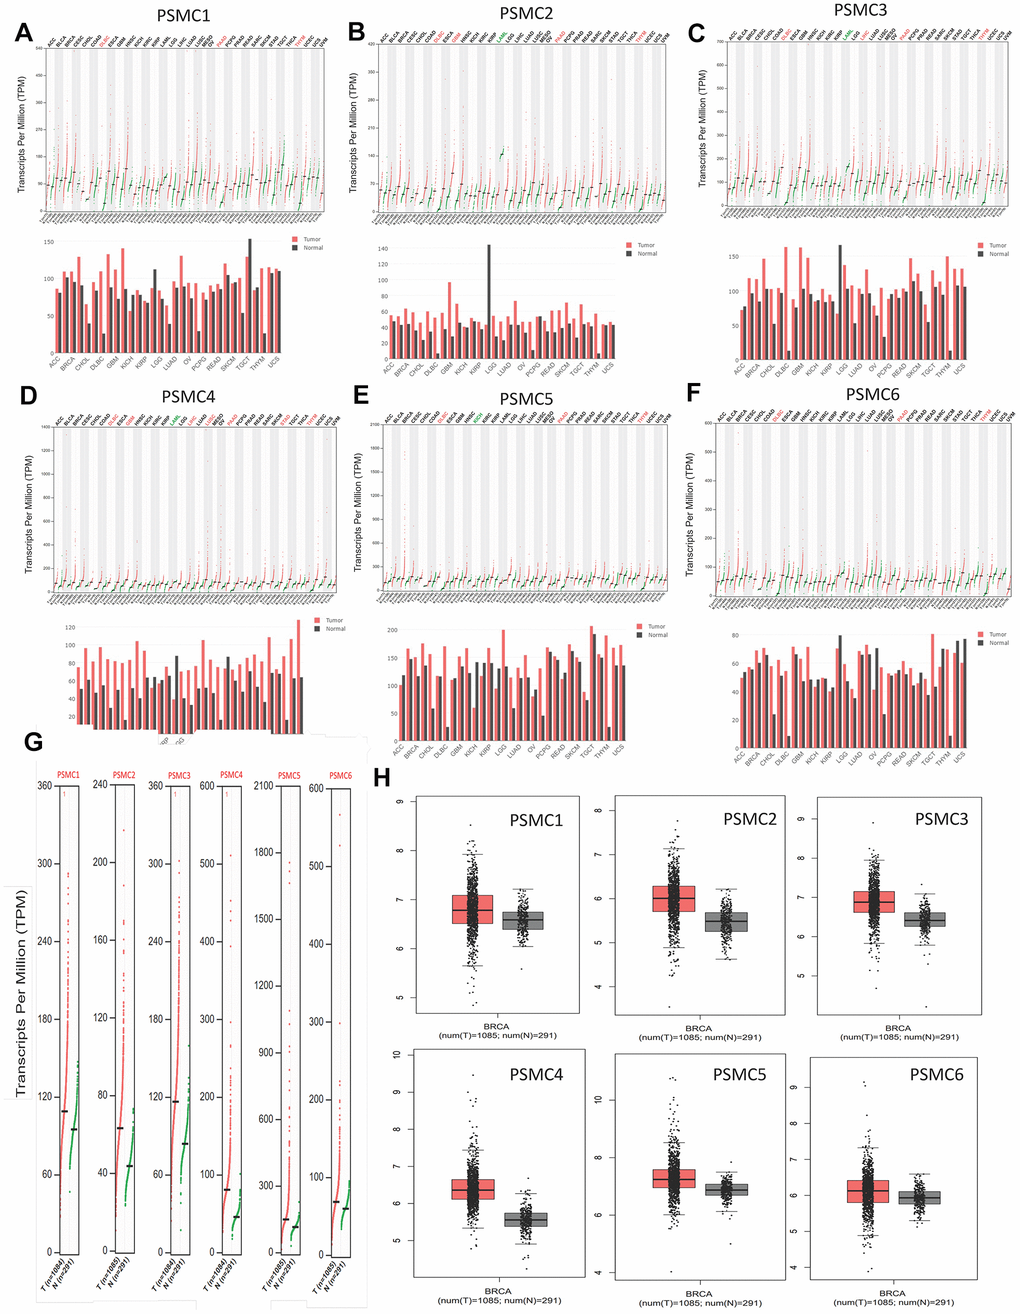 Transcript expressions of proteasome 26S subunit, ATPase (PSMC) genes in breast cancer. (A–F) Expressions of PSMC members in multiple types of cancer. (G, H) Transcript expressions of PSMC members in clinical breast cancer patients. Red bar and box plots show tumor expression while green/gray colors represent normal breast tissues.